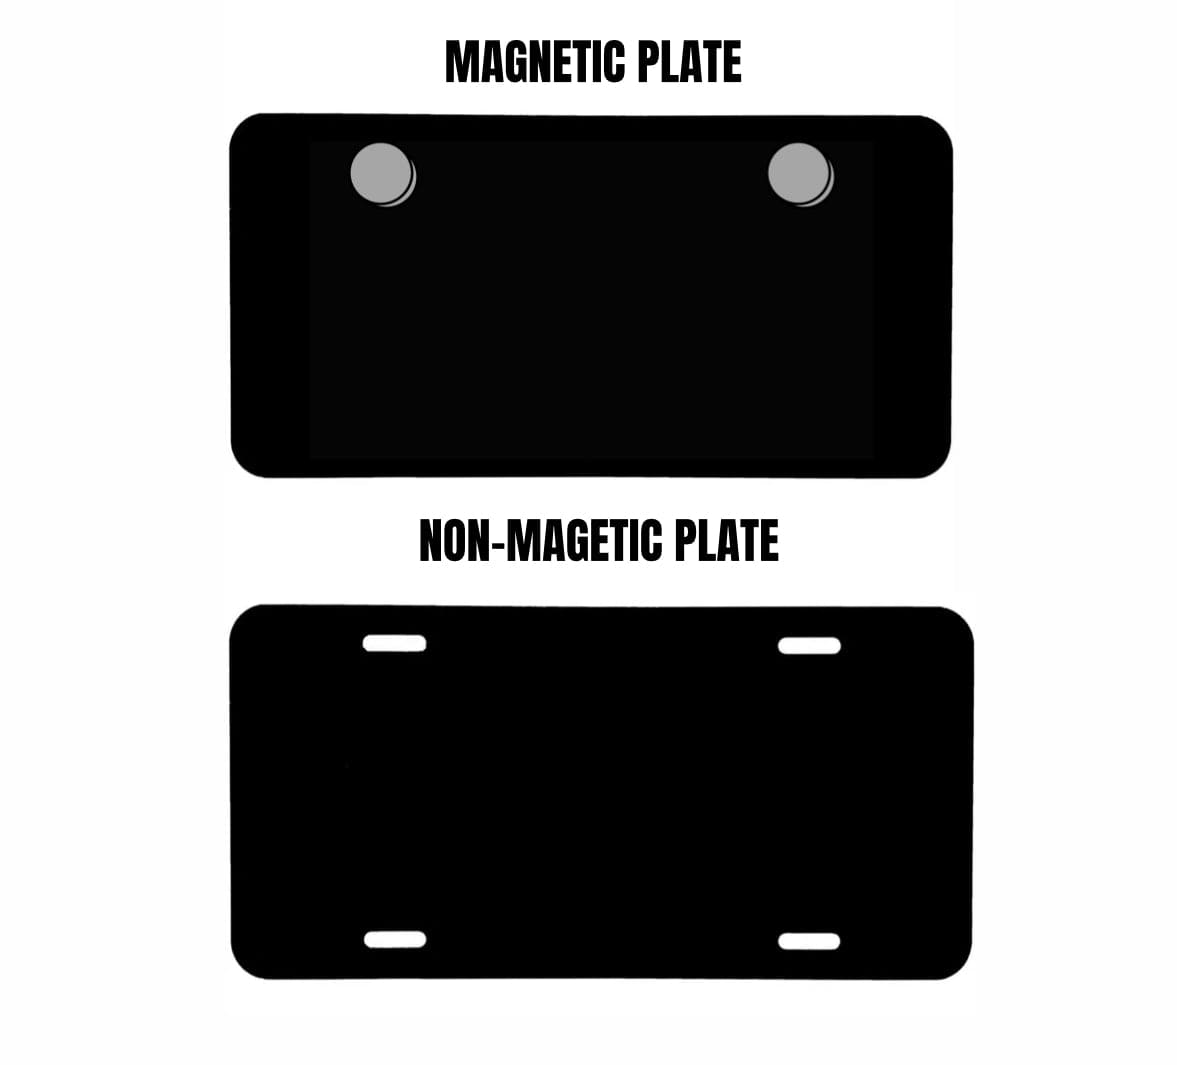 Mexico Plate Cover (CUSTOM TEXT)